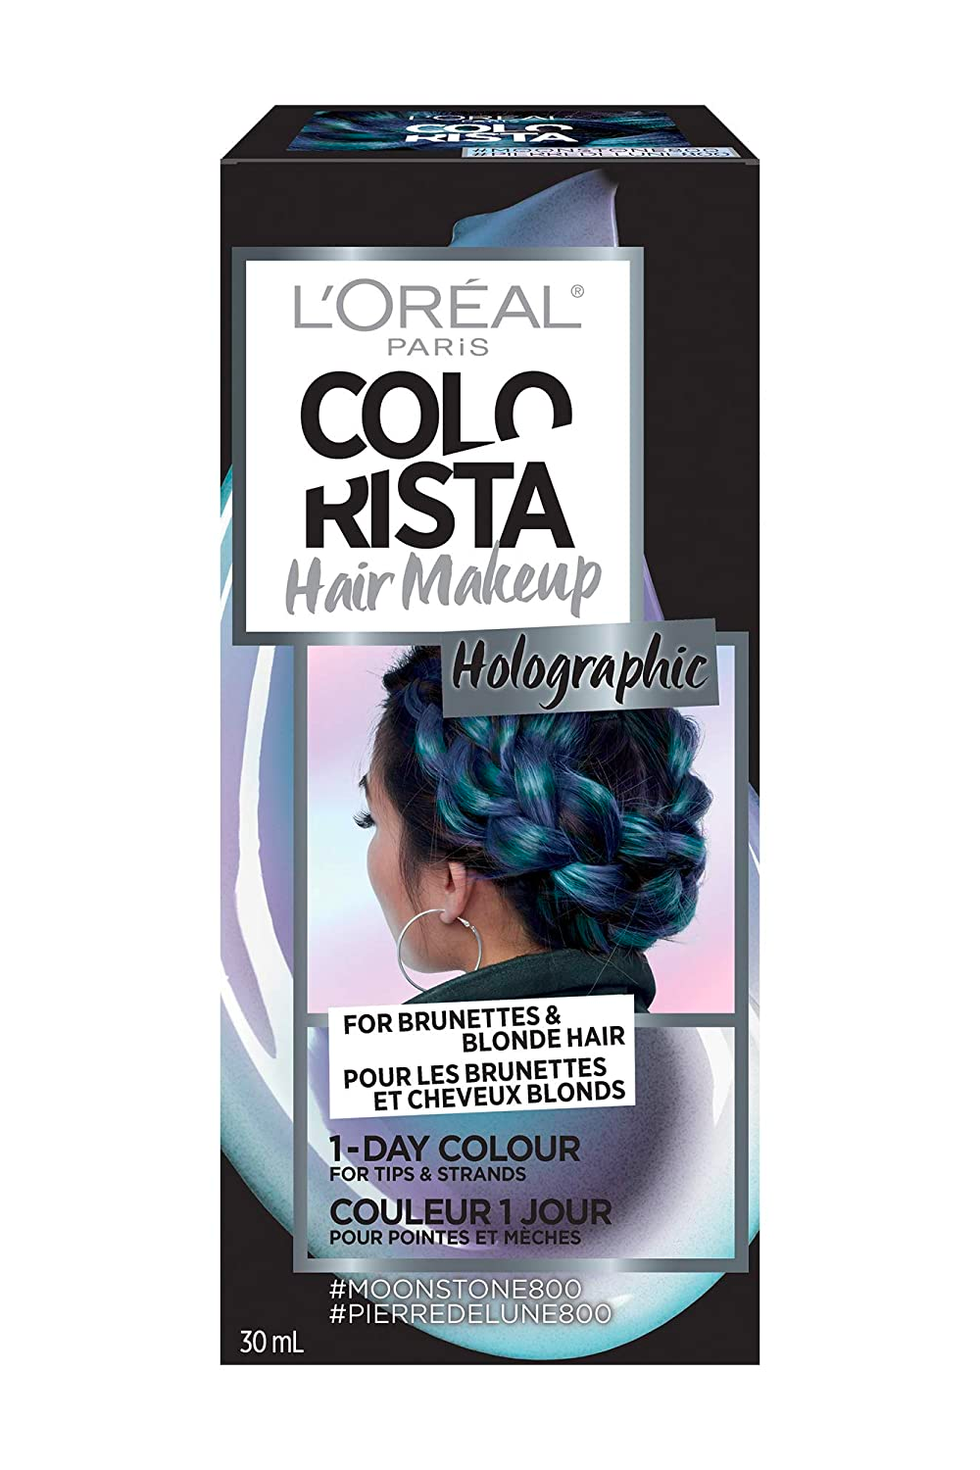 Punky Color Colour Off Kit Hair Color Remover For Temporary,  Semi-permanent, Demi-permanent And Permanent Hair Dye